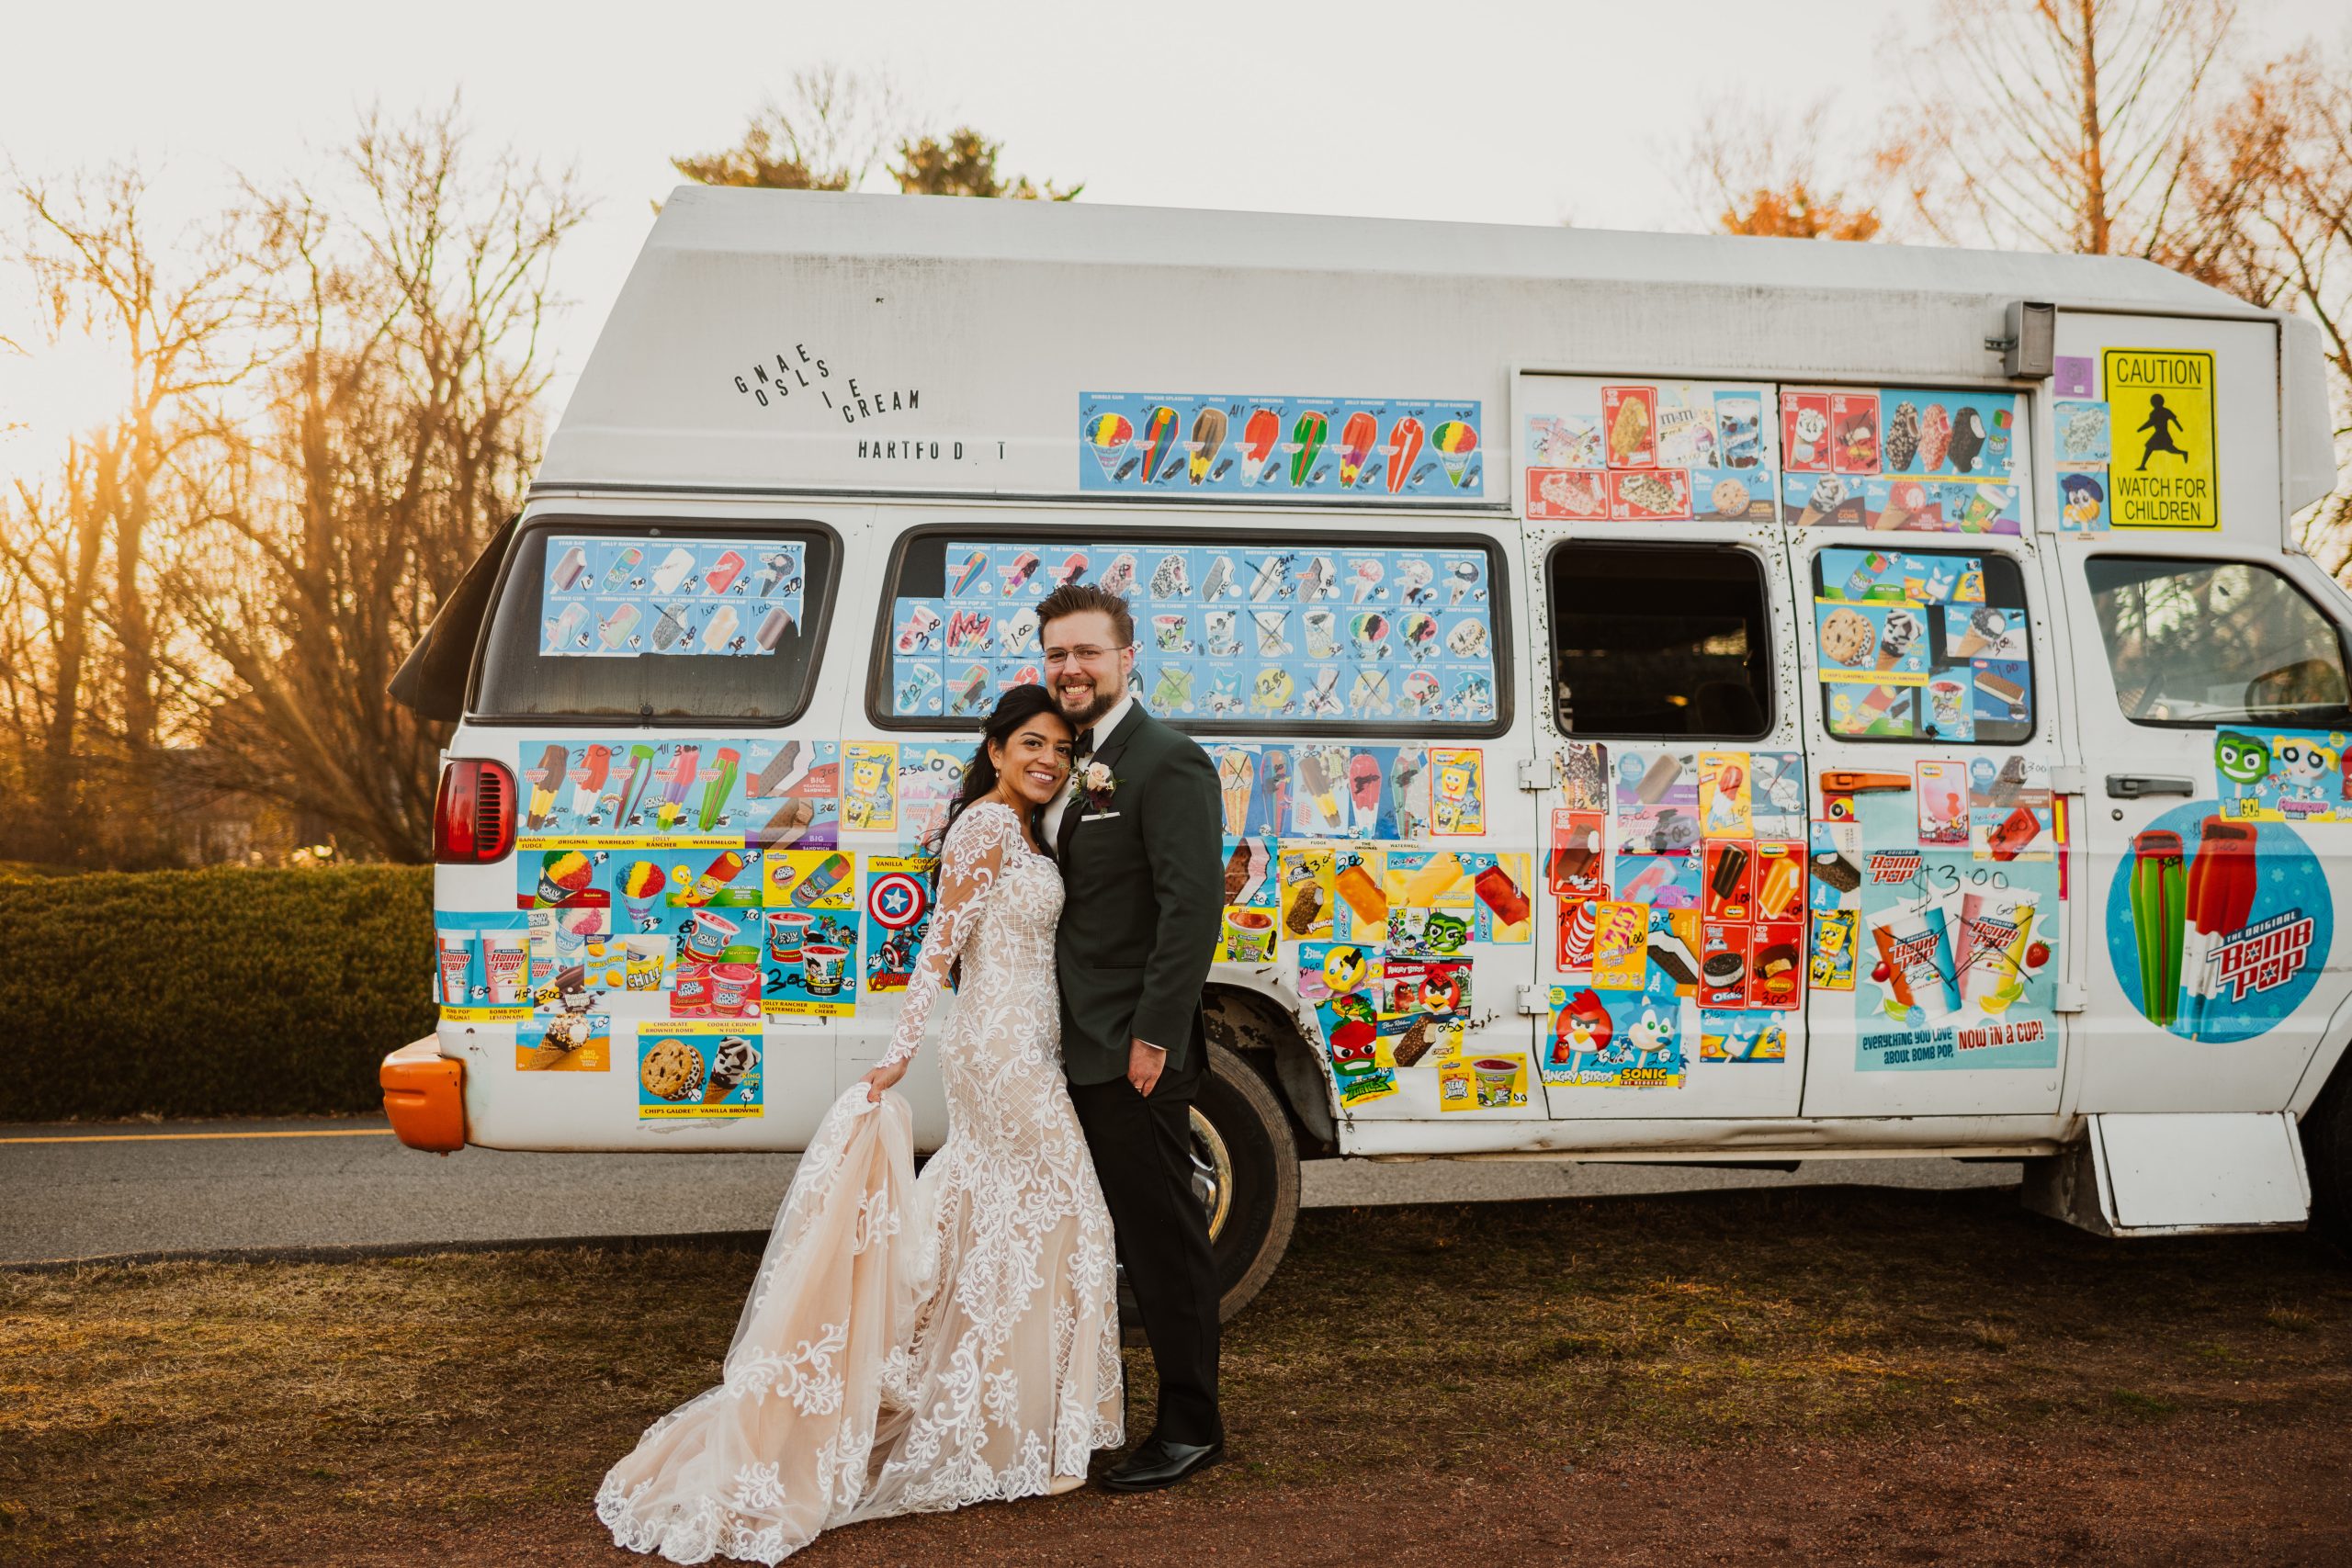 Photo Of Food Truck For Wedding With Bride In Long Sleeve Wedding Dress Called Dakota By Sottero And Midgley